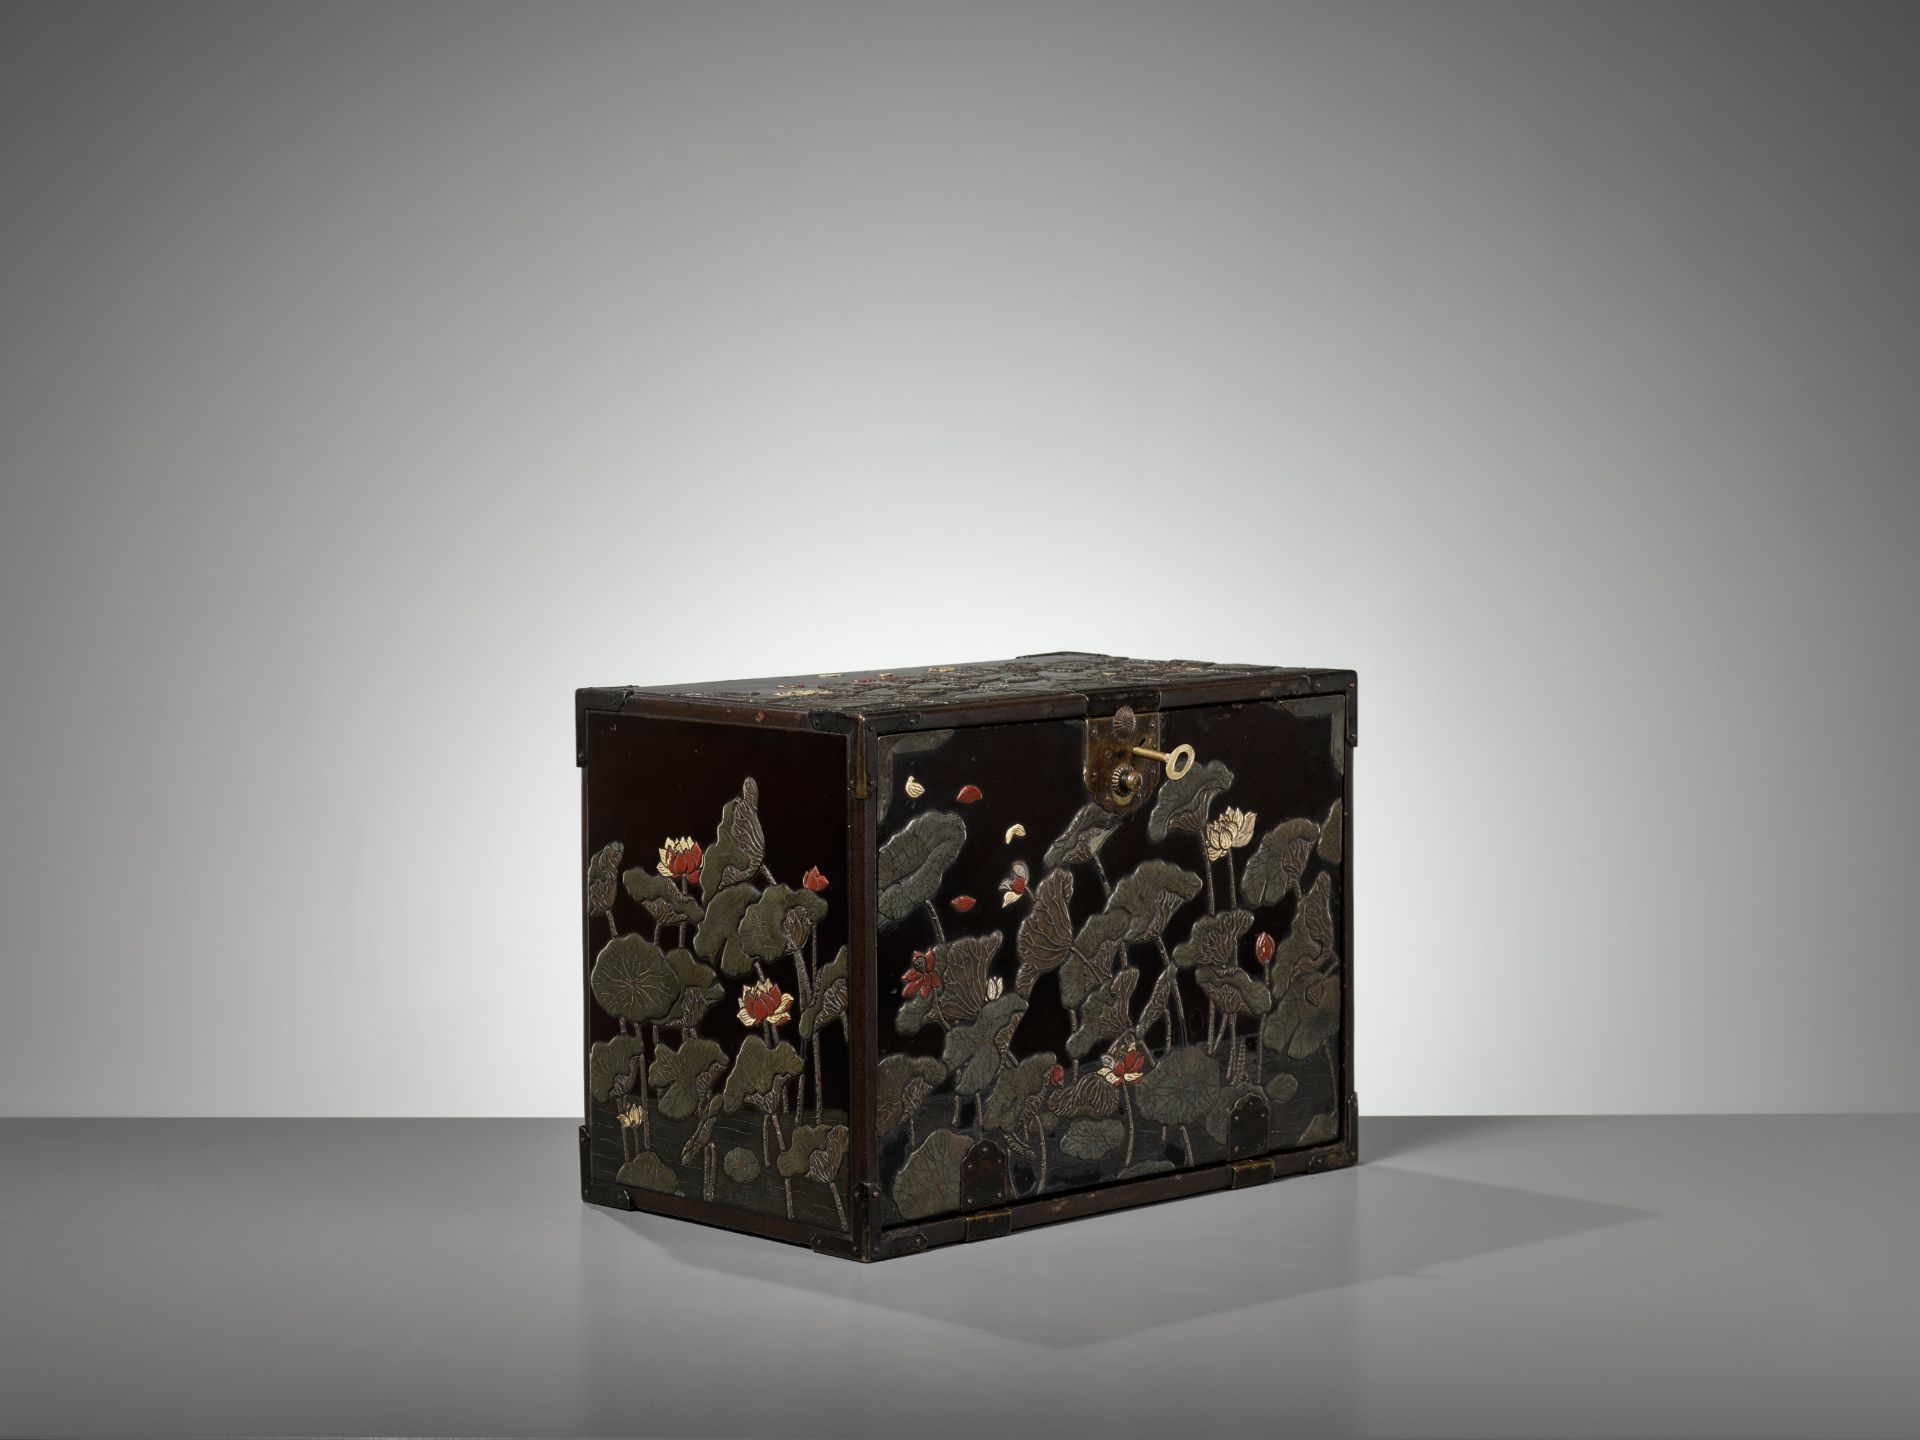 A RITSUO STYLE CERAMIC-INLAID AND LACQUERED WOOD KODANSU (CABINET) WITH A LOTUS POND AND EGRETS - Image 10 of 14